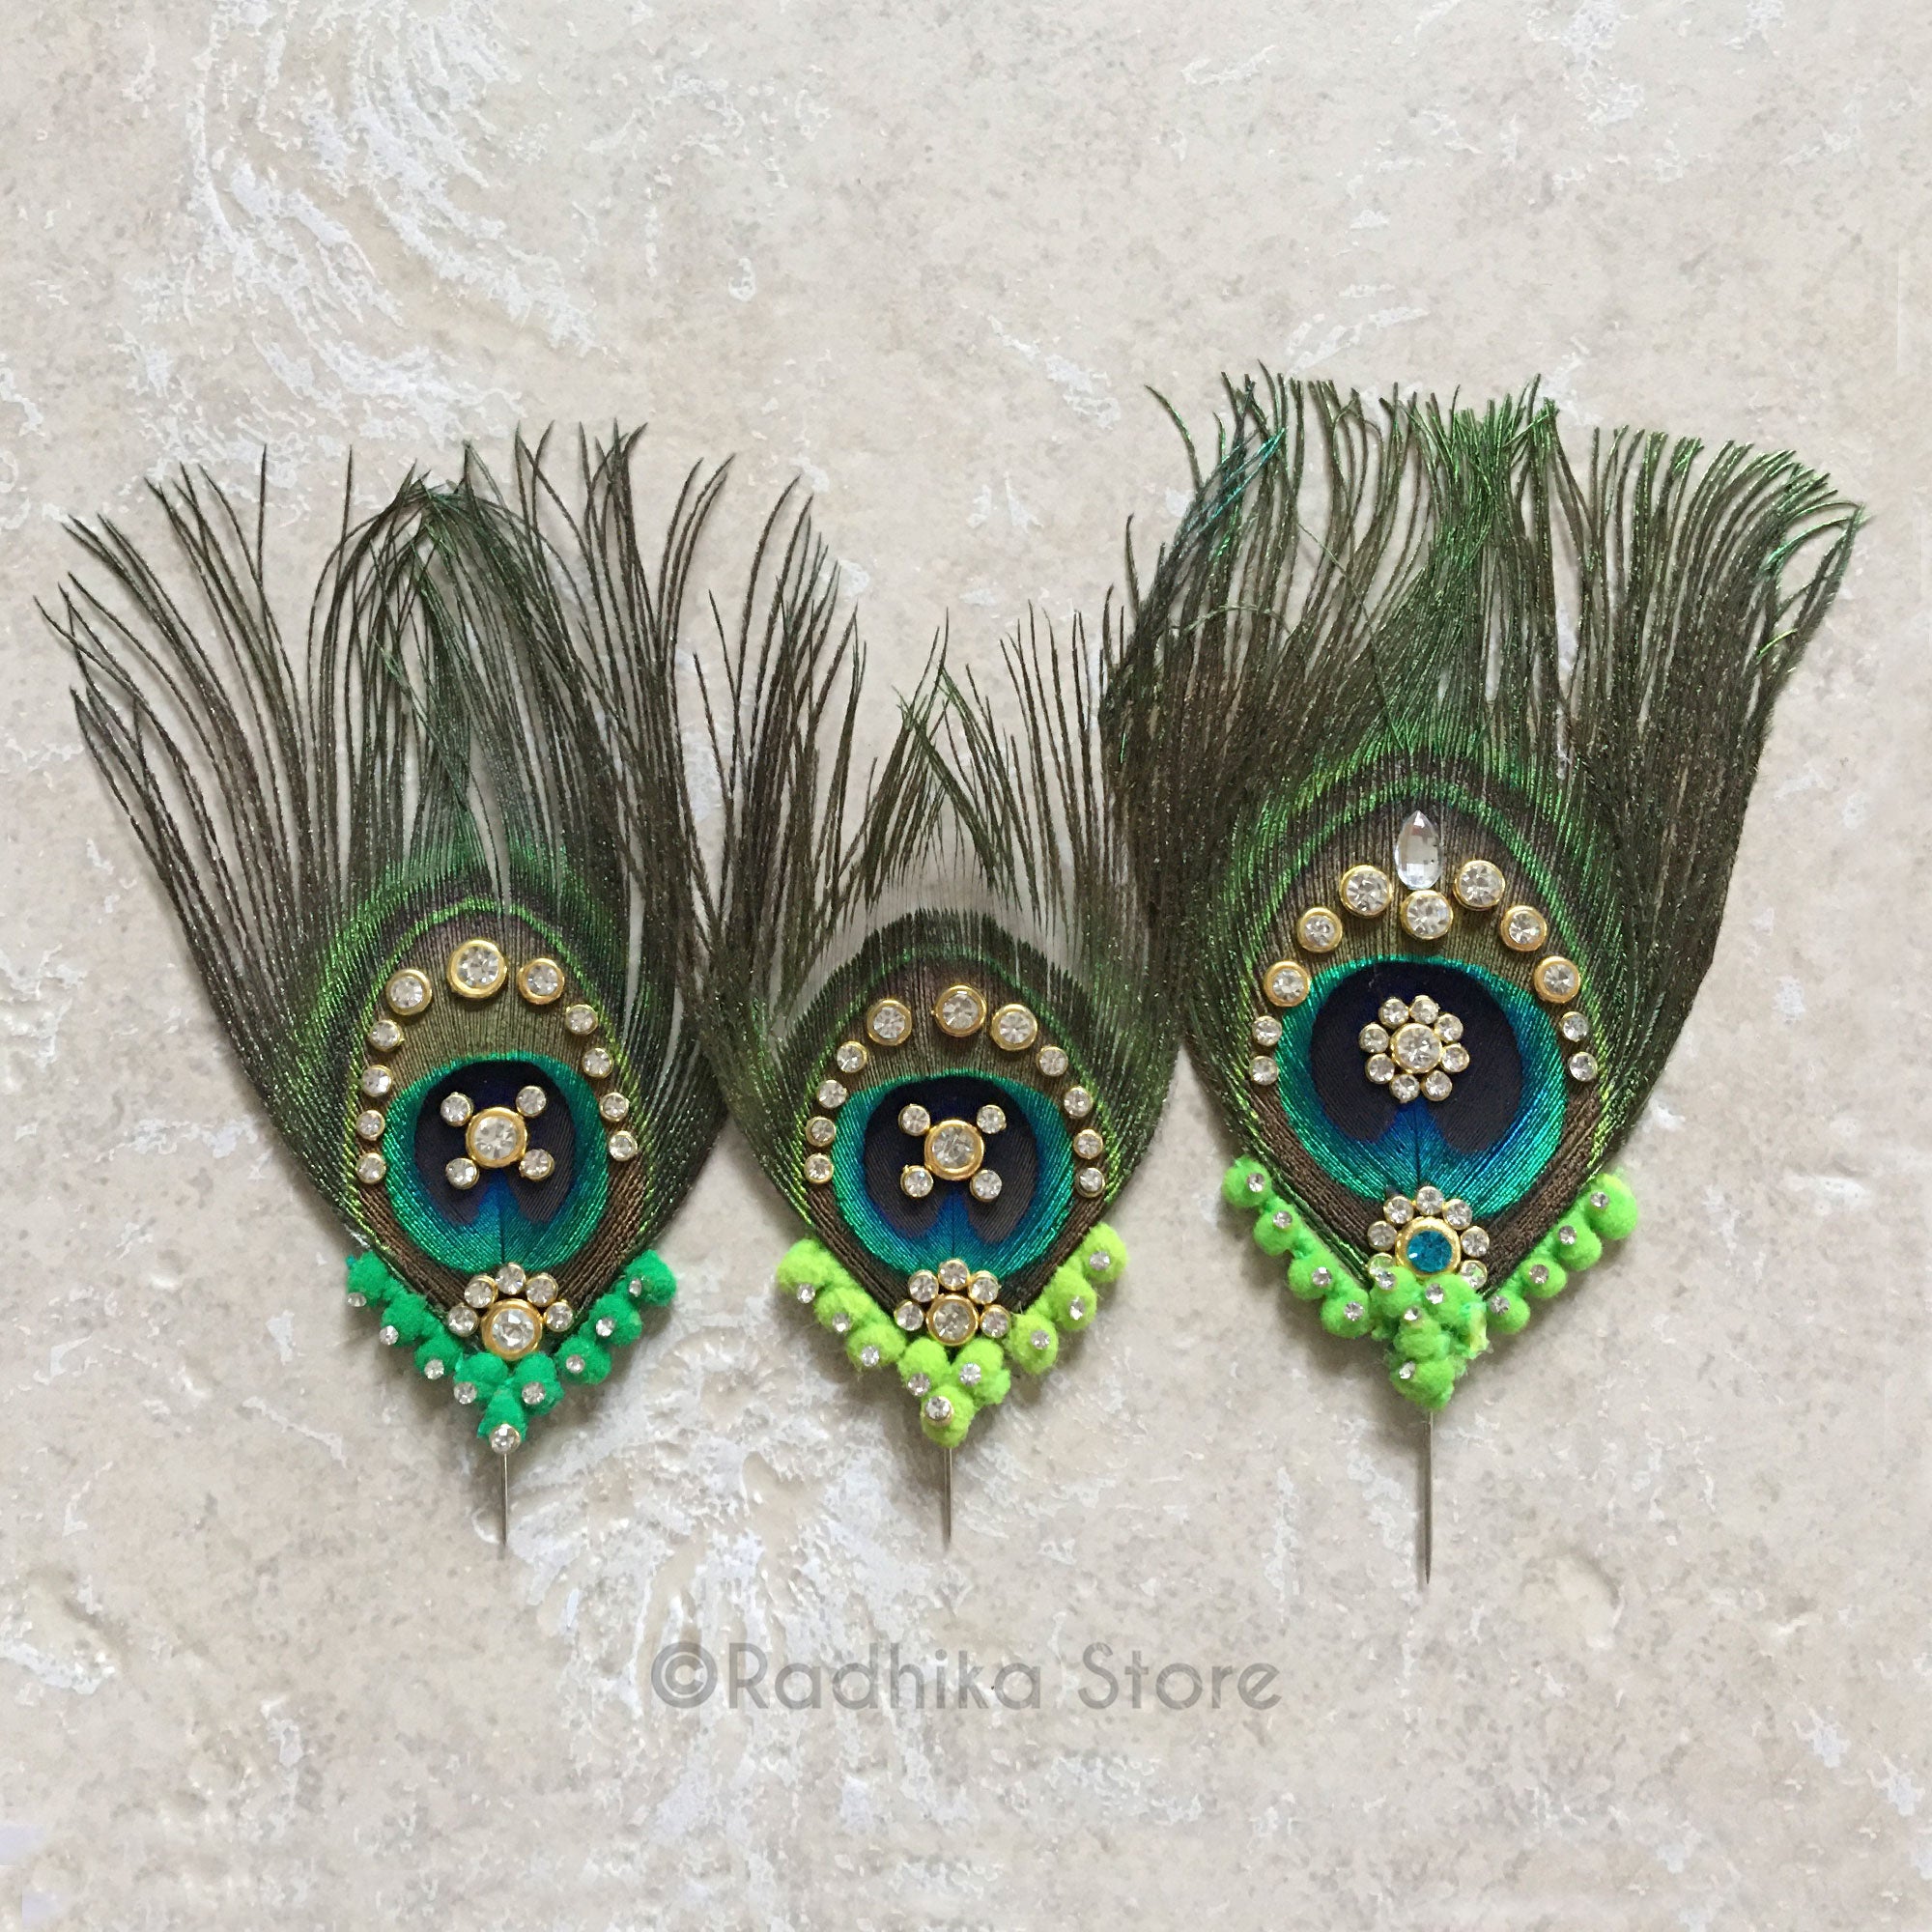 Extra Large Crystal Peacock Feathers - Green Colors